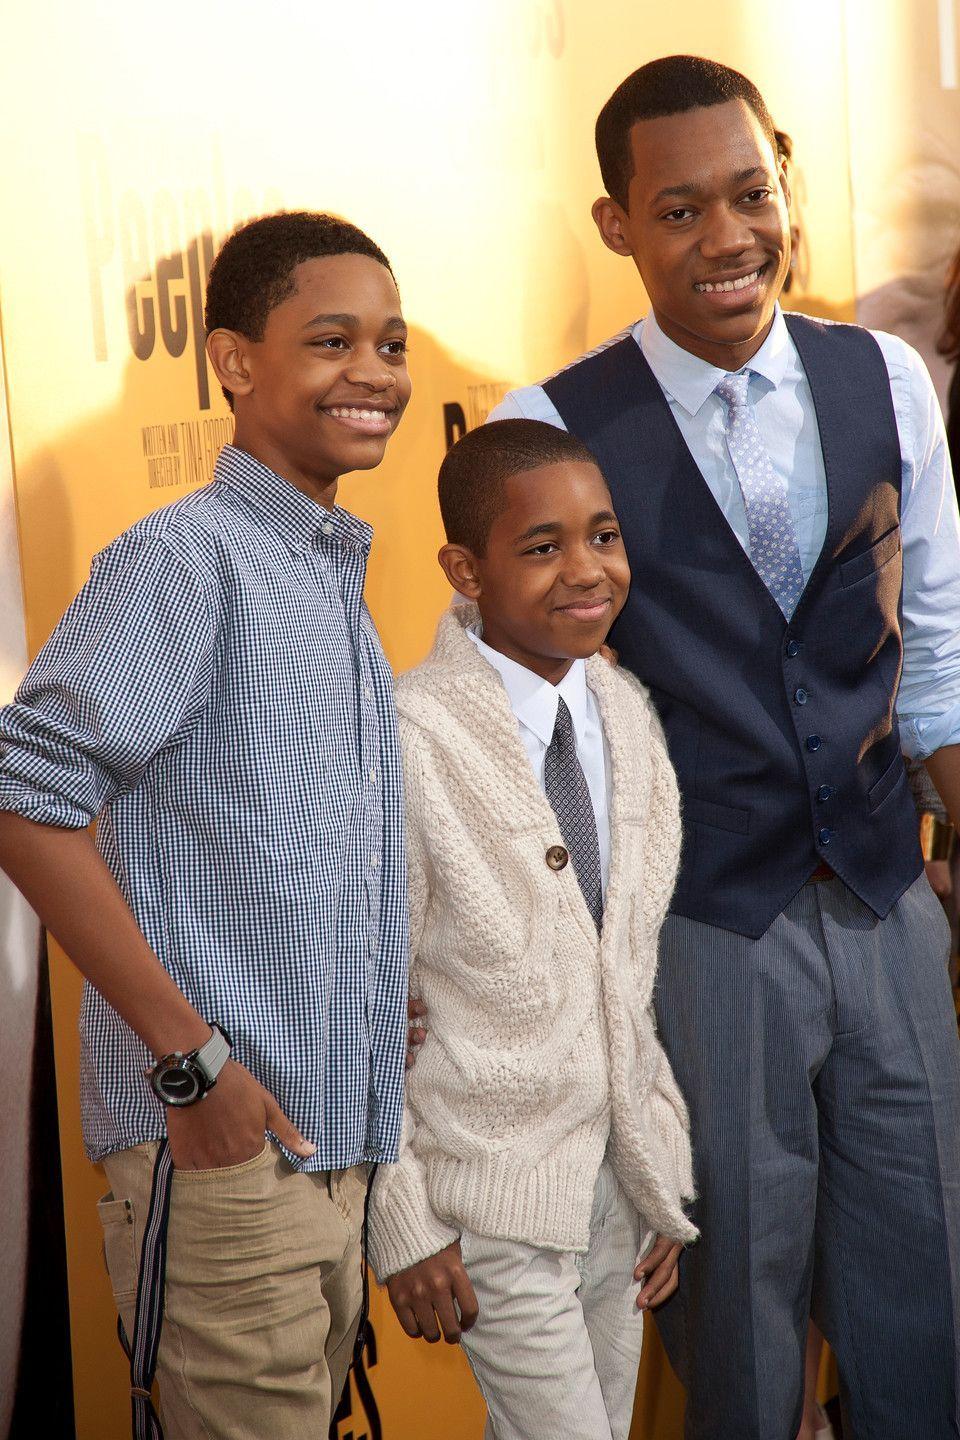 HOLLYWOOD, CA 08: Actors Tyrel Jackson Williams, Tylen Jacob Williams and Tyler James Williams attends the premiere. Tyler james, Young cute boys, Premiere